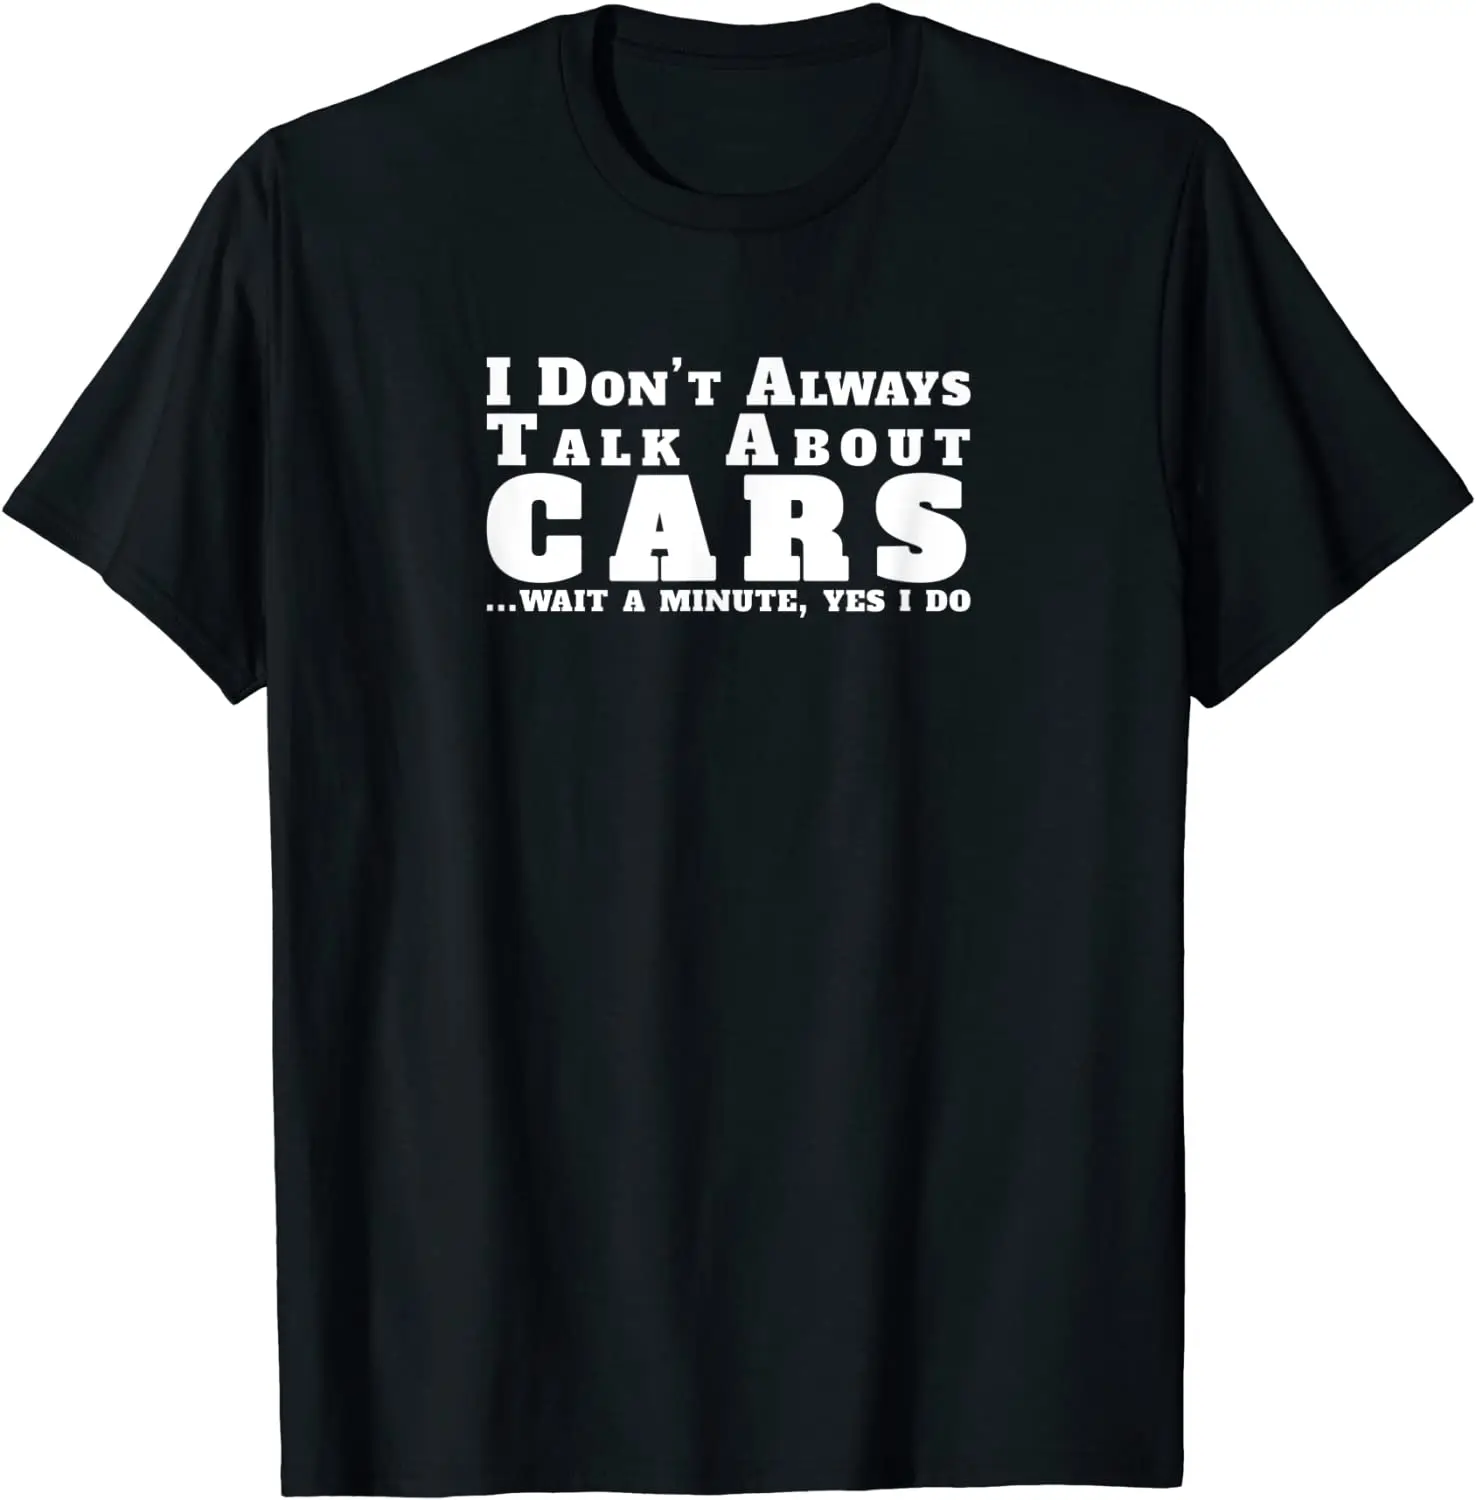 

I Don't Always Talk about Cars Shirt - Funny Car T-Shirt Men Fashion Casual Cotton T Shirts Summer Short Sleeve Graphic Tees